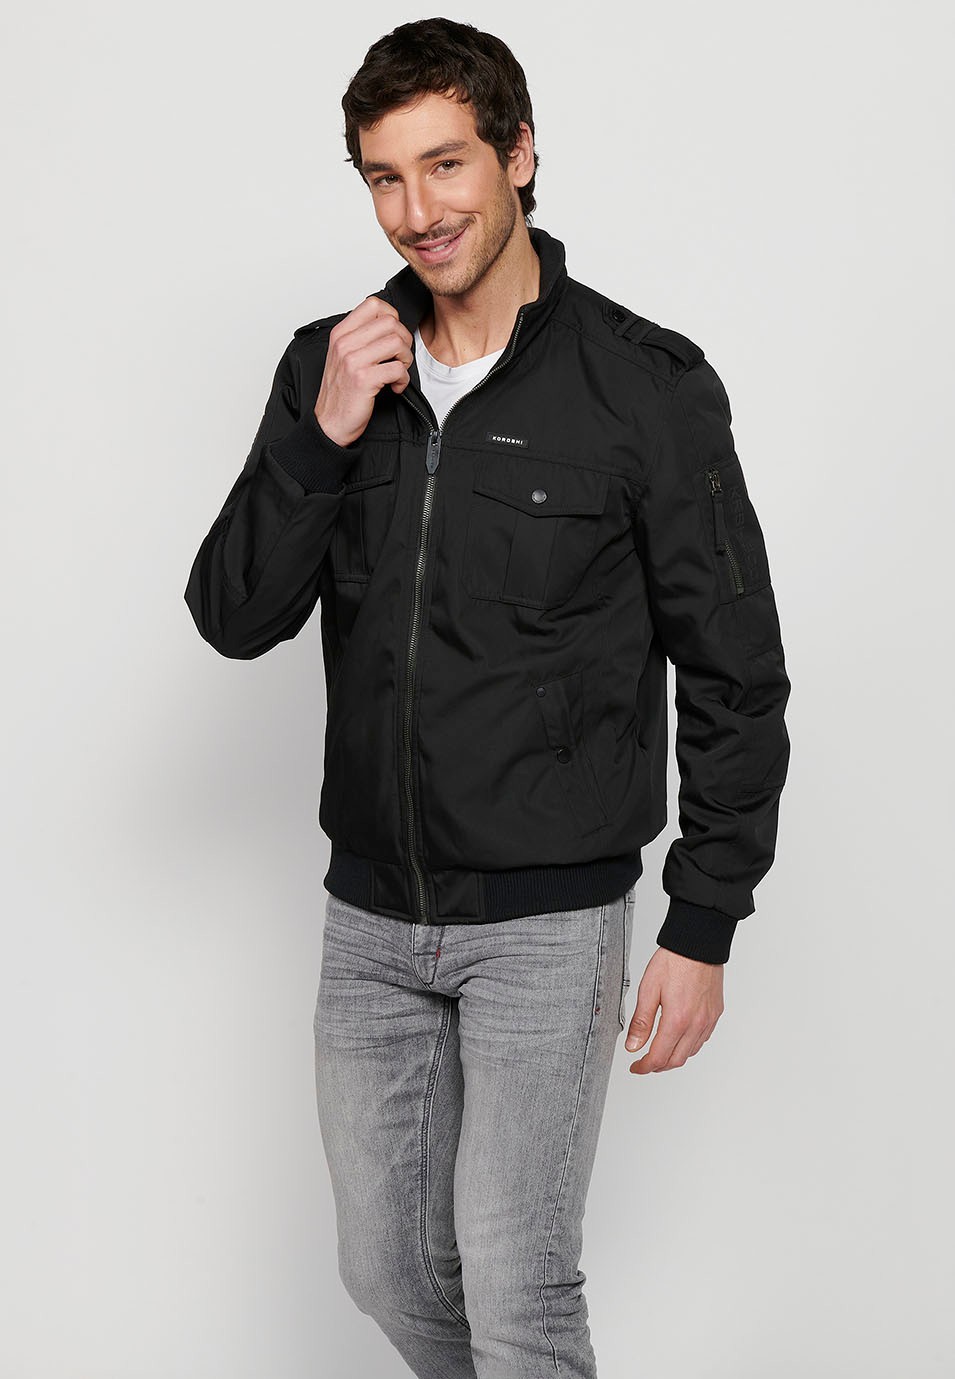 Black Long Sleeve Jacket with Round Neck and Front Zipper Closure with Flap Pockets for Men